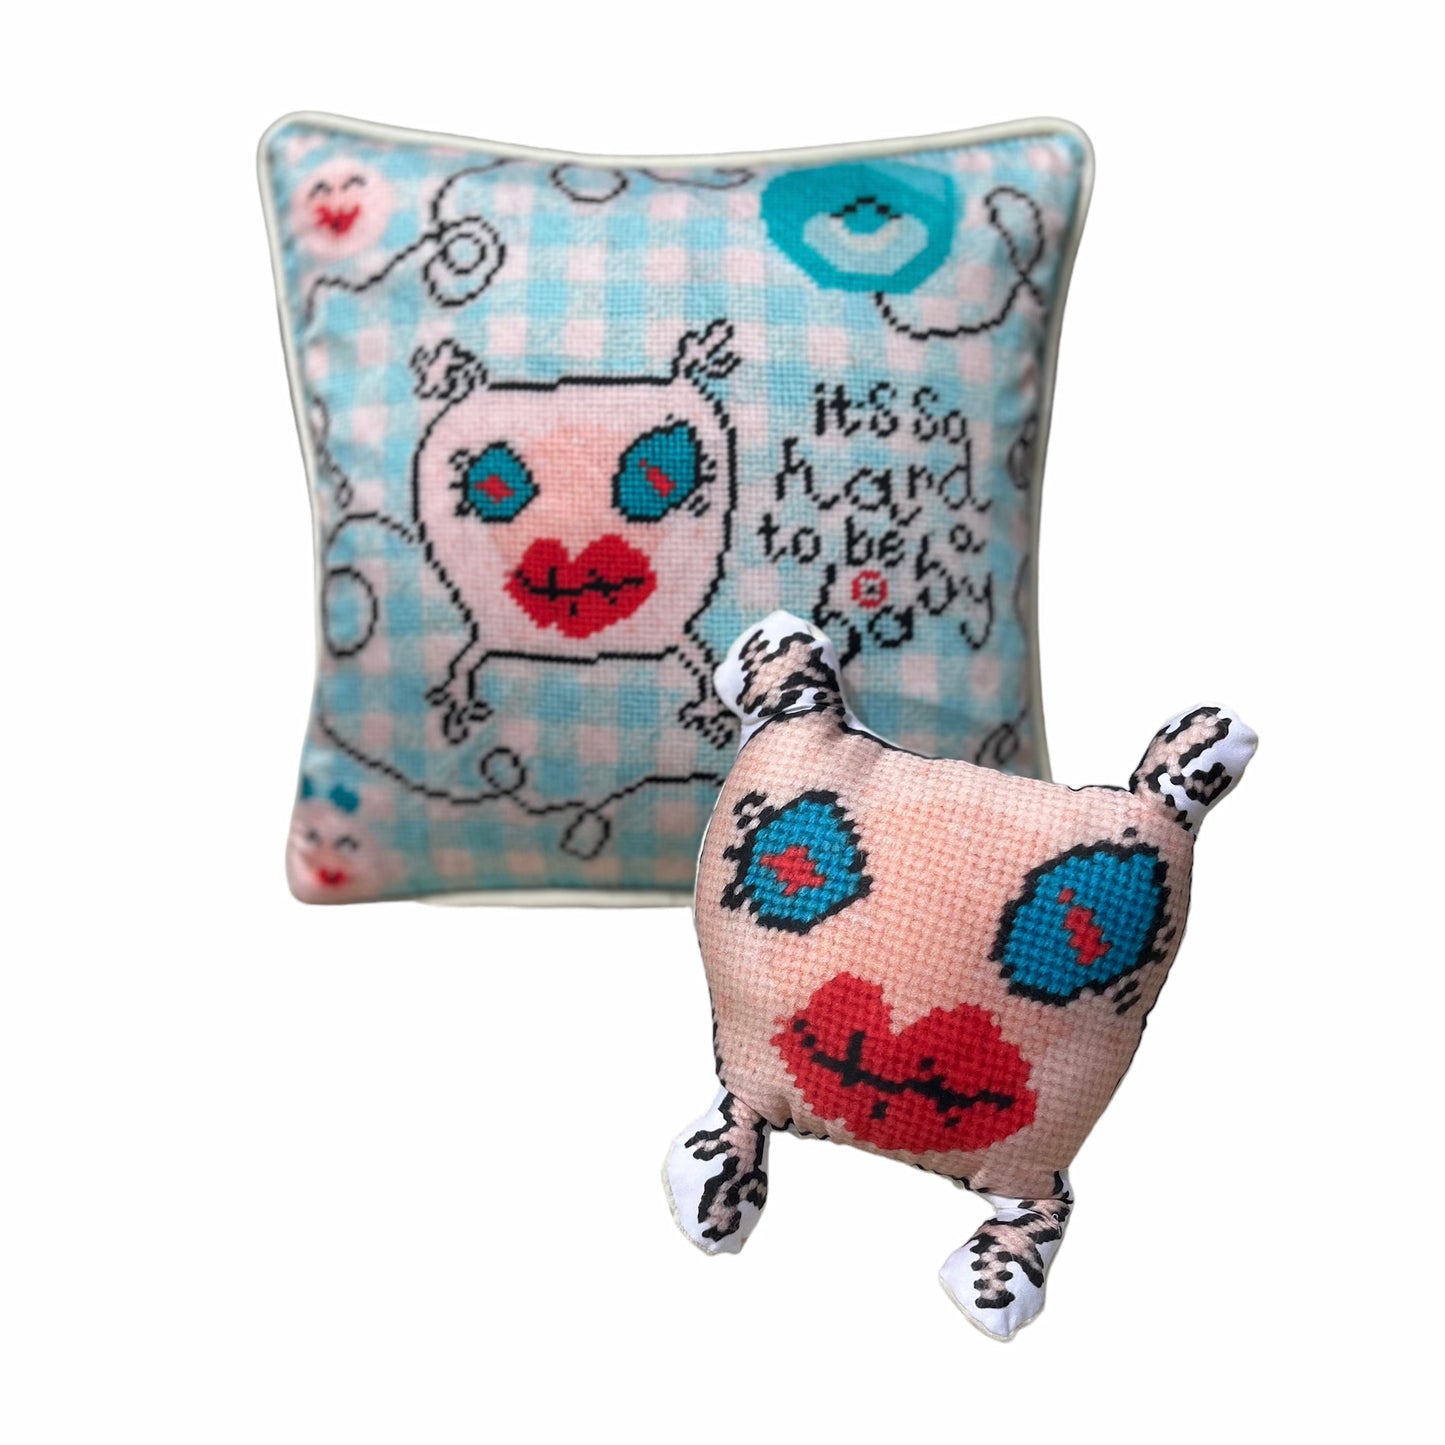 https://mommanithreads.com/products/sweet-mommani-baby-monster-pillow?_pos=1&_sid=cb1d658ad&_ss=r&variant=40130012381247